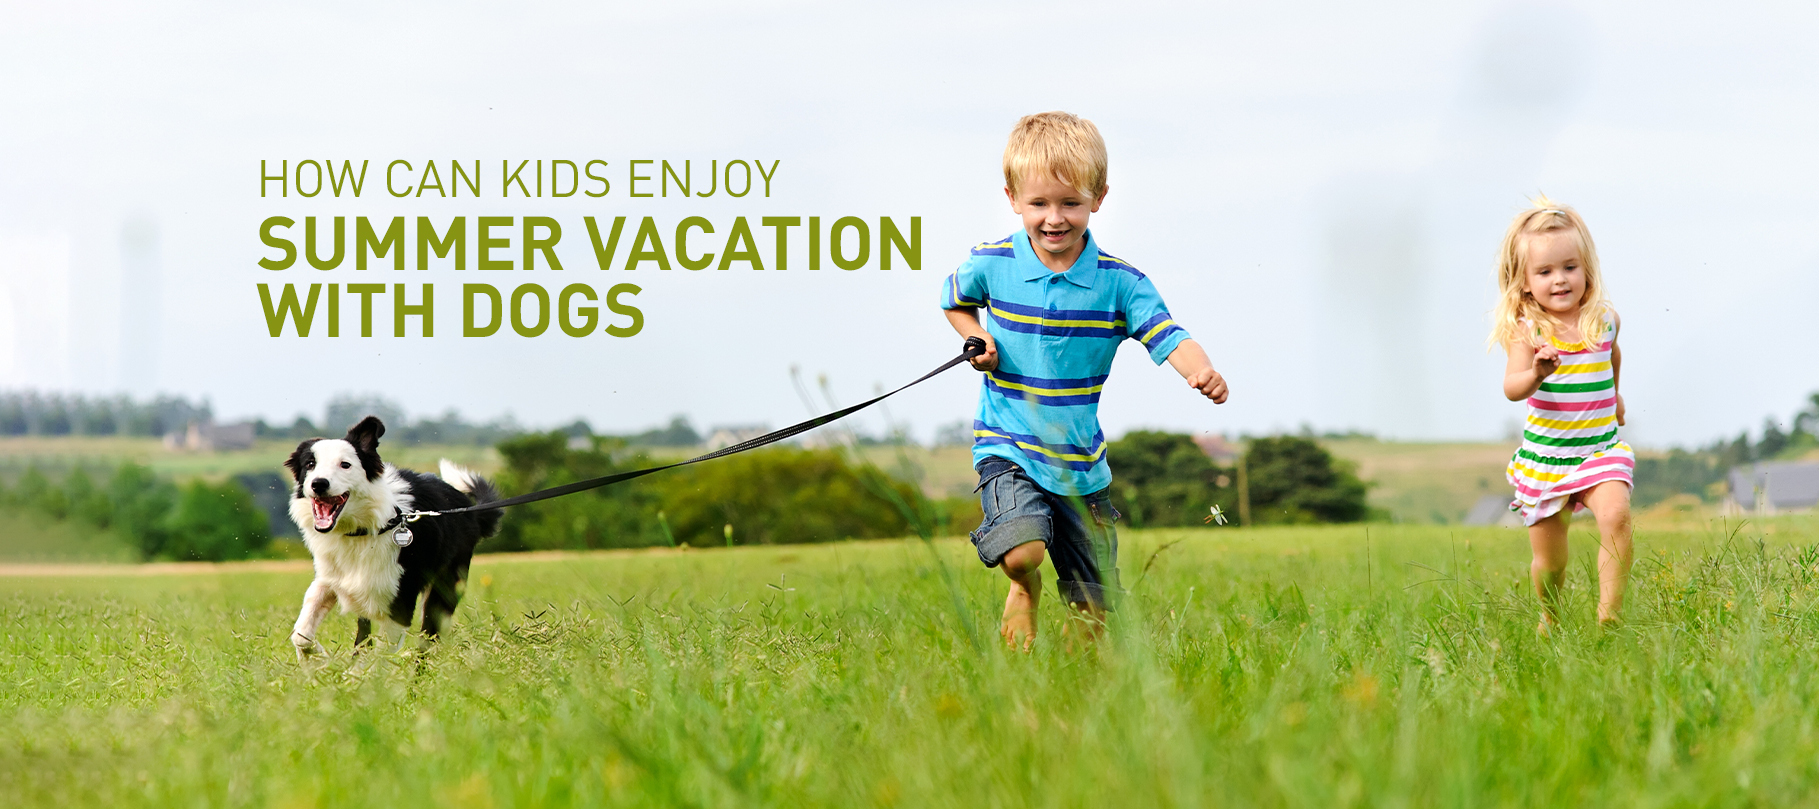 How Can Kids Enjoy Summer Vacation with Dogs